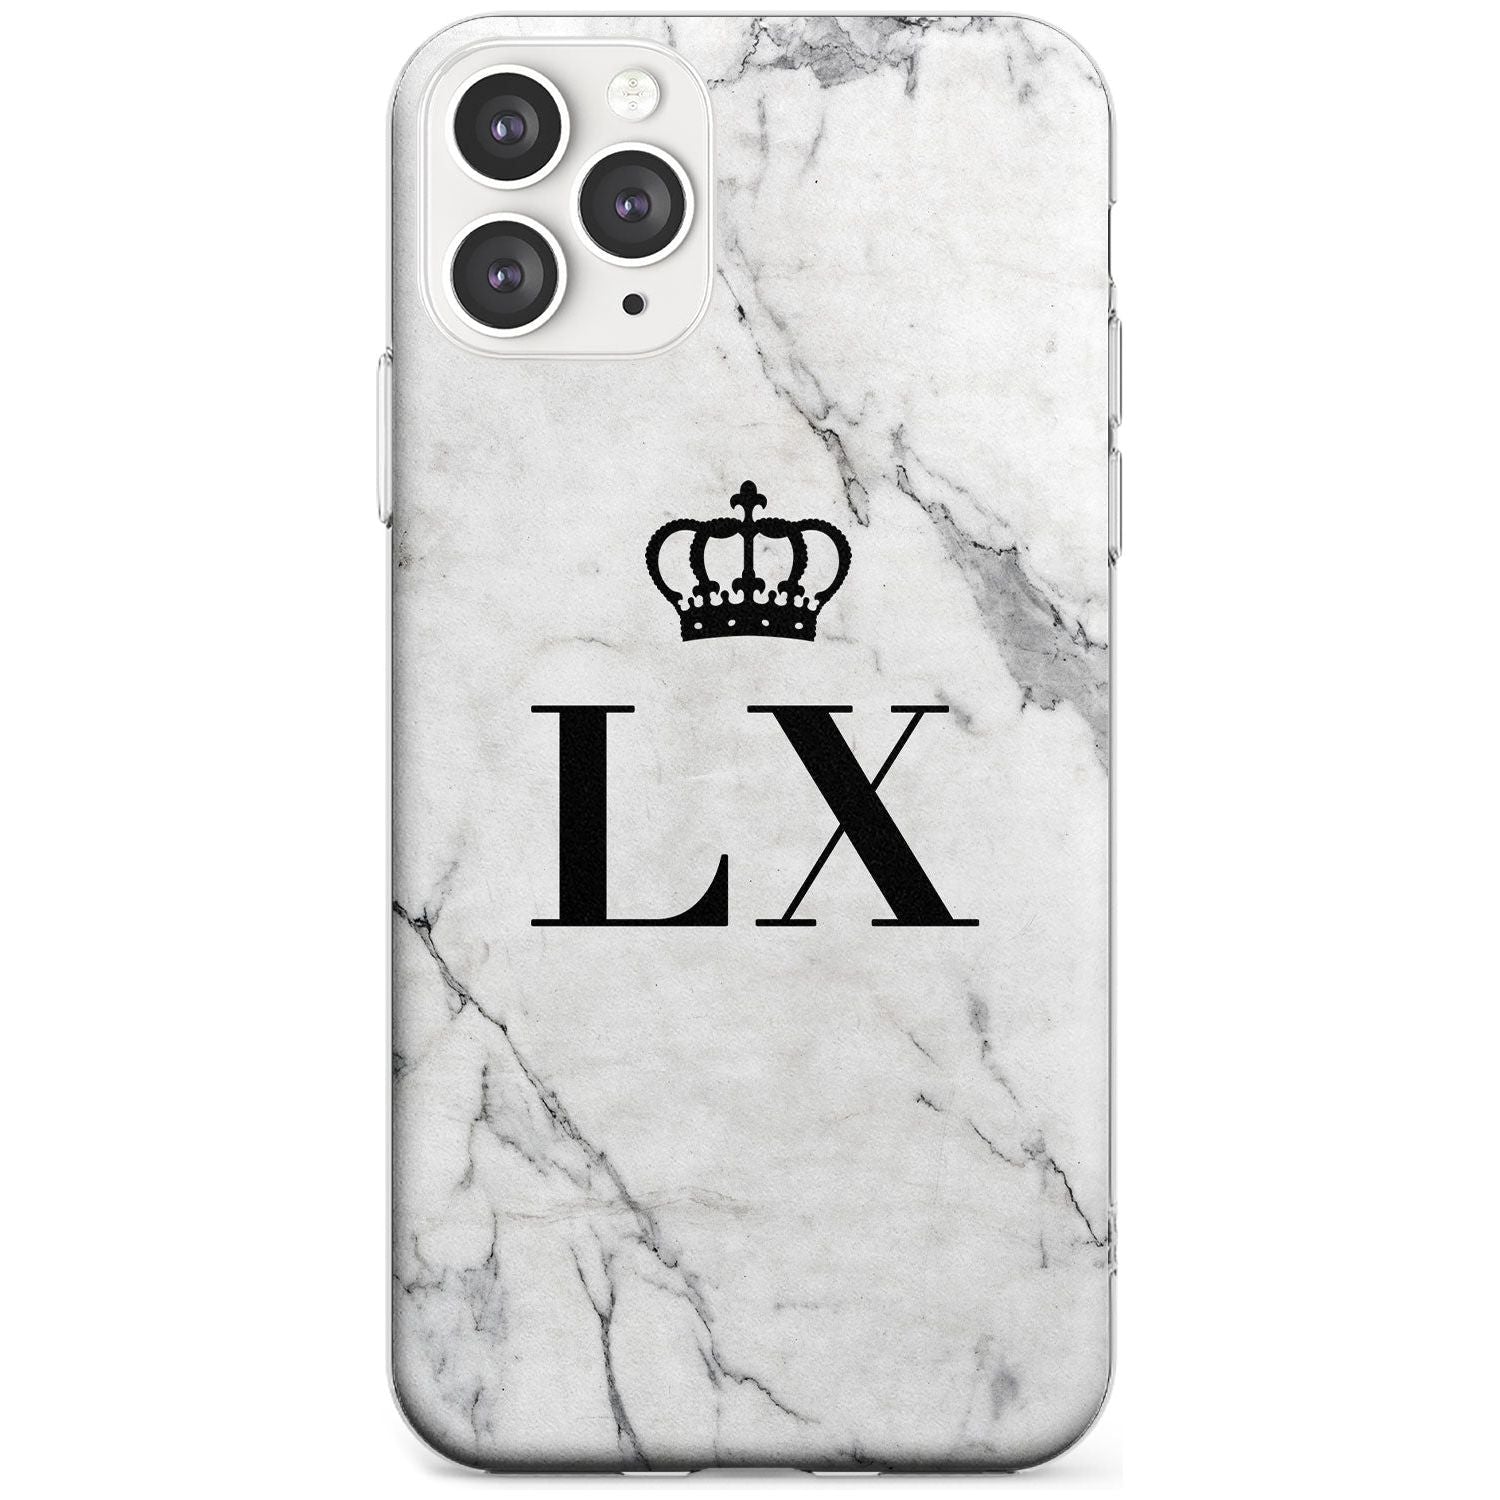 Personalised Initials with Crown on White Marble Slim TPU Phone Case for iPhone 11 Pro Max